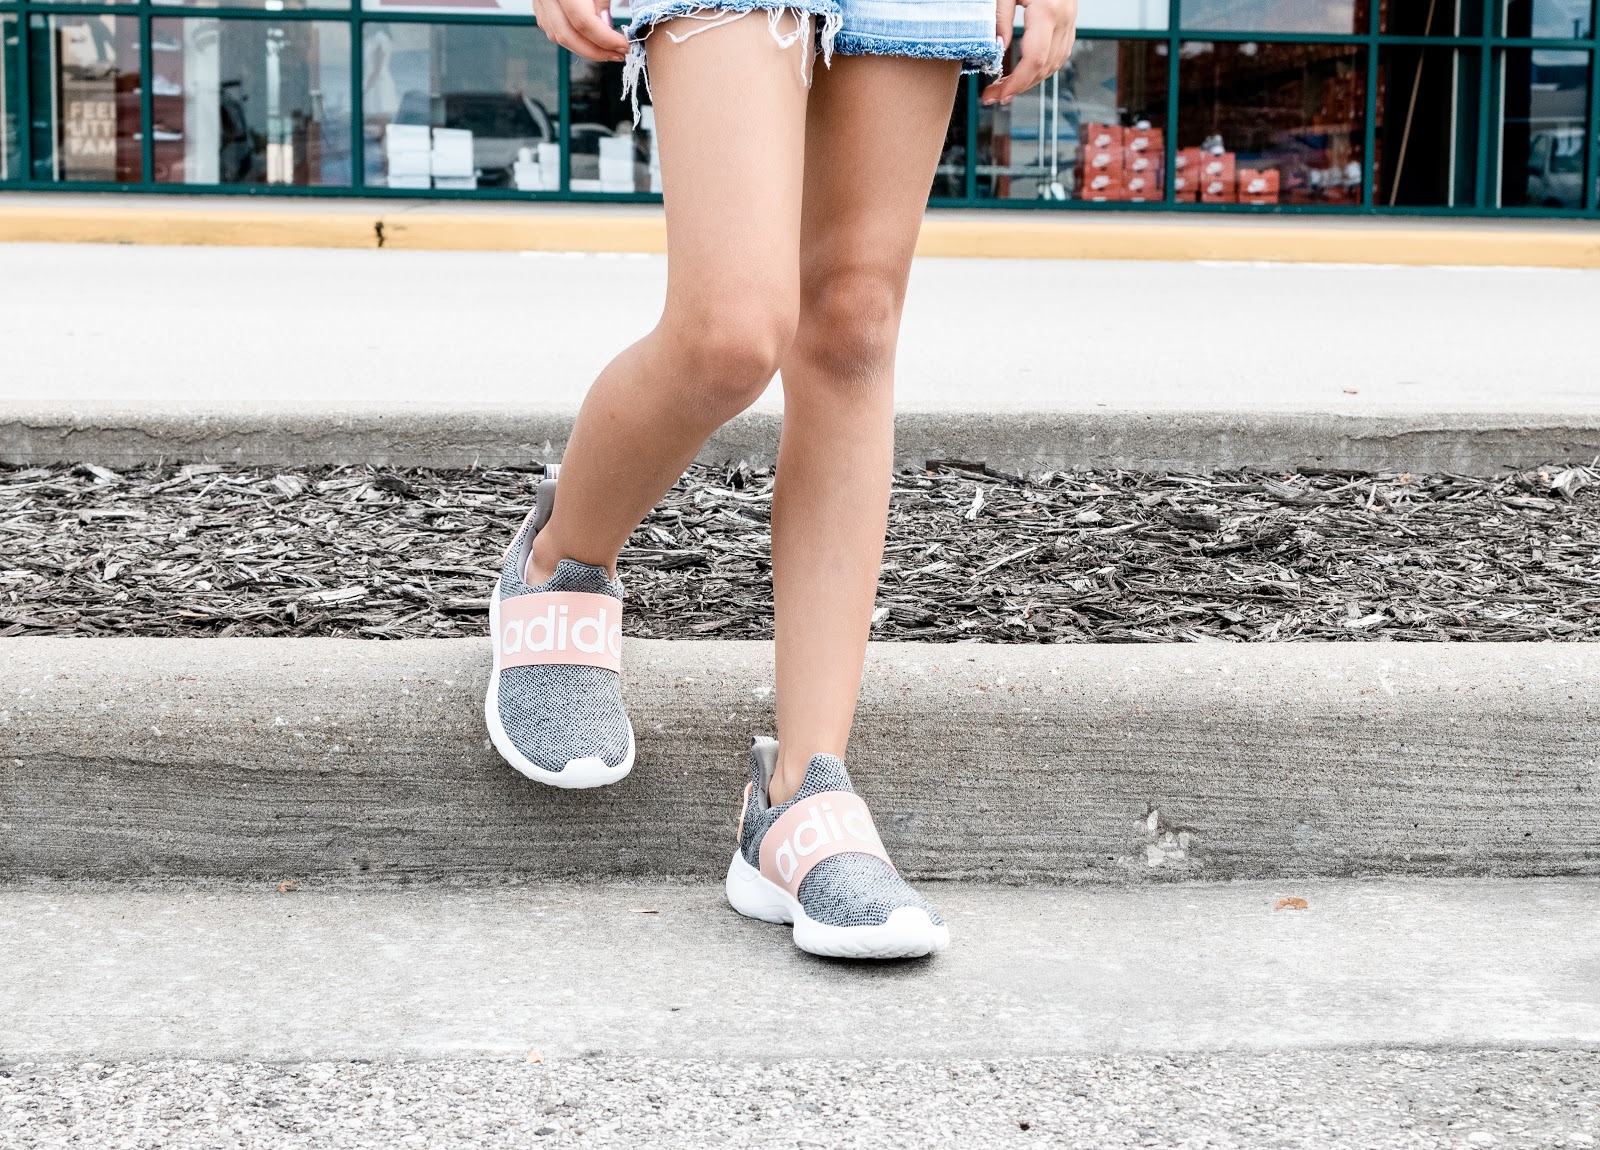 Finding the Perfect (and fastest) Back to School Shoes! Back to School Shoes Athletic Shoes Adidas Shoes Nike Shoes Under Armour Shoes Kids Shoes Girls Shoes Youth Shoes Sneakers Tennis Shoes Running Shoes ROXY Casual Sneakers Comfortable Shoes 